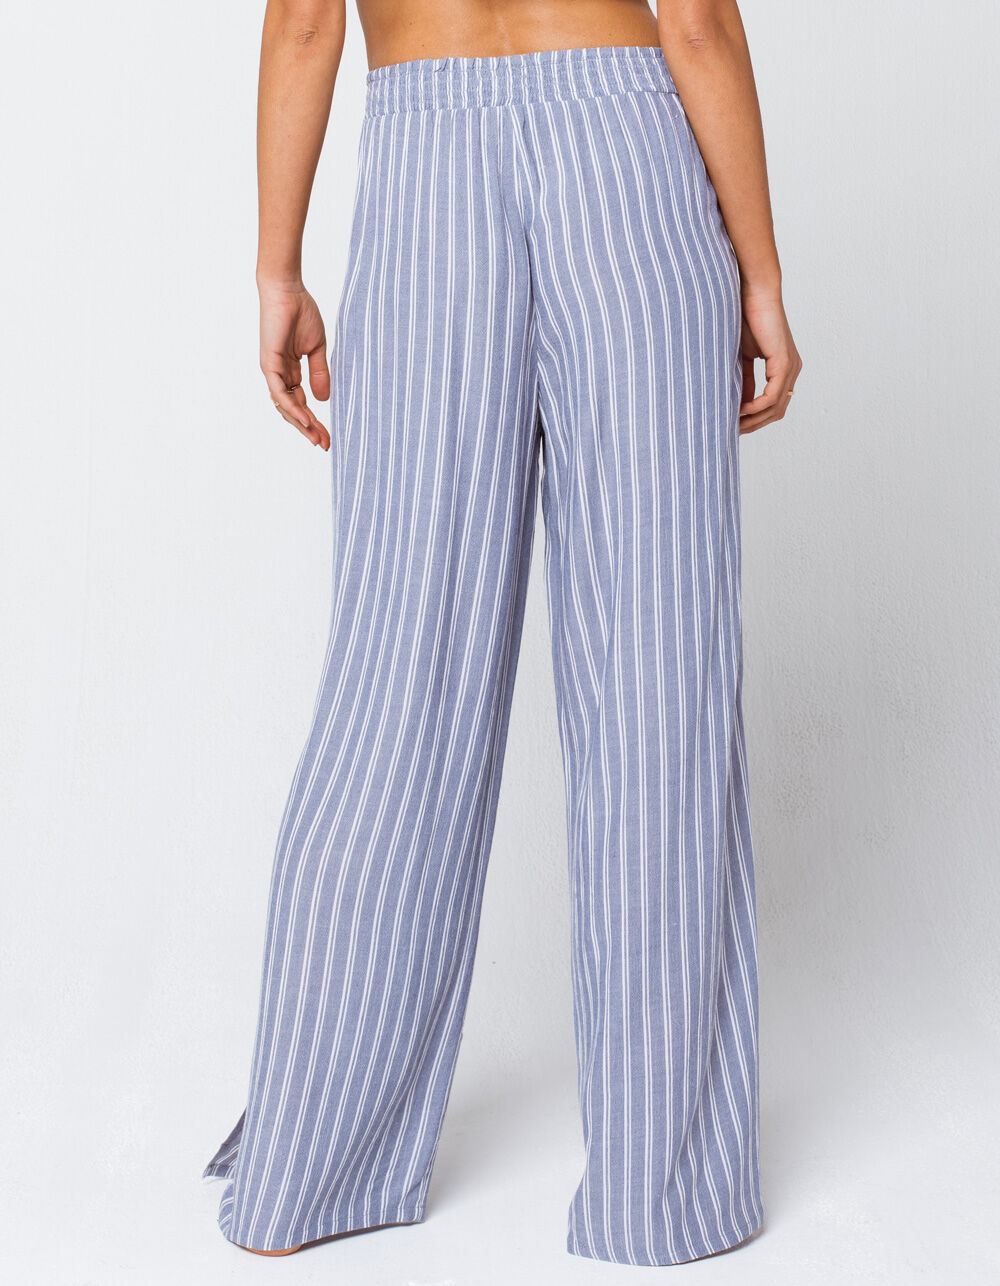 ROXY Keep Your Dream Womens Pants - BLUE/WHITE | Tillys